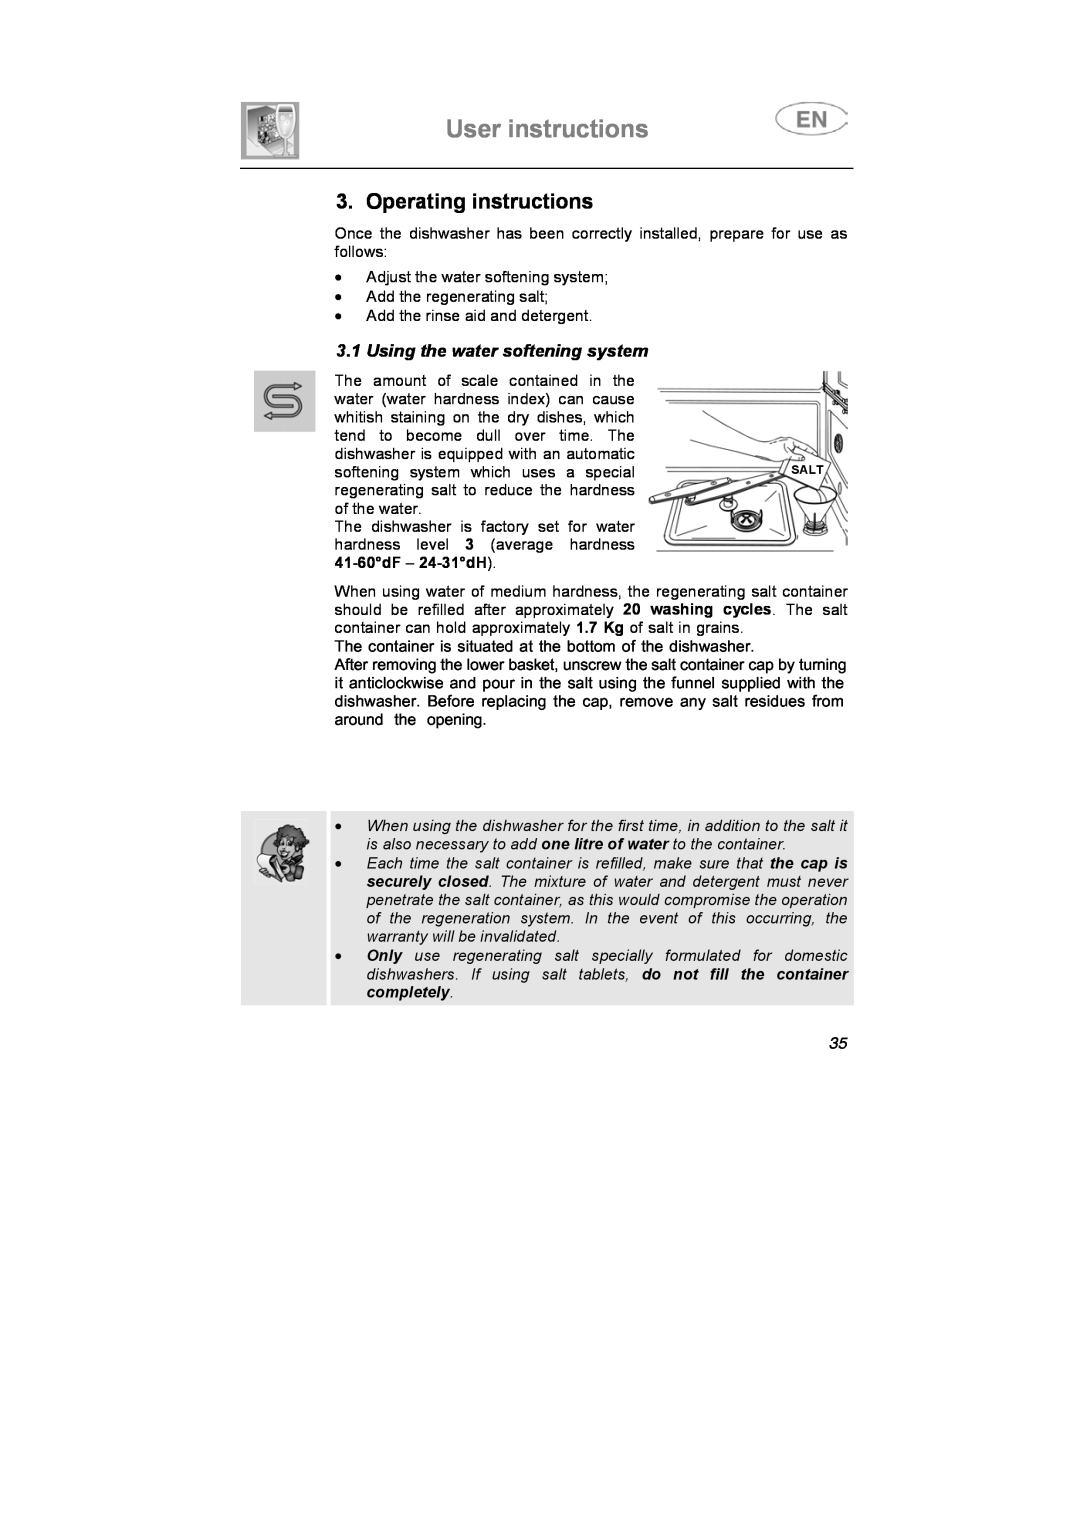 Smeg BLV1R instruction manual Operating instructions, Using the water softening system, User instructions 